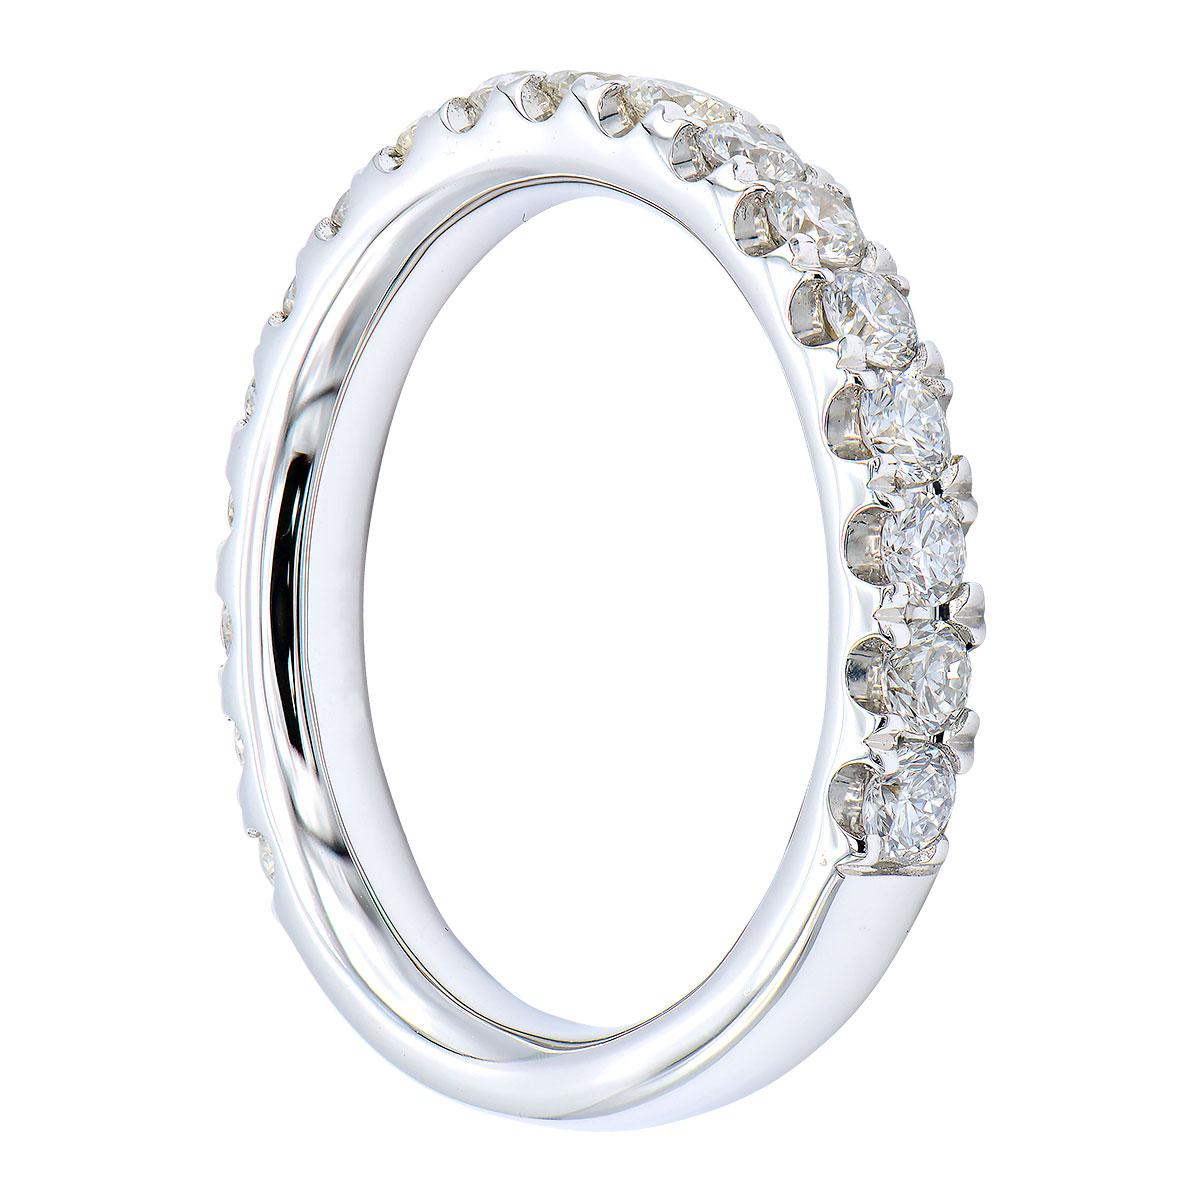 Classic, Timeless and Simple. Always in style and can be worn all the time. This makes up the perfect diamond band. This band is made from 15 round VS2, G color diamonds which are set in a row halfway around the band in 4.5 grams of 18 karat white